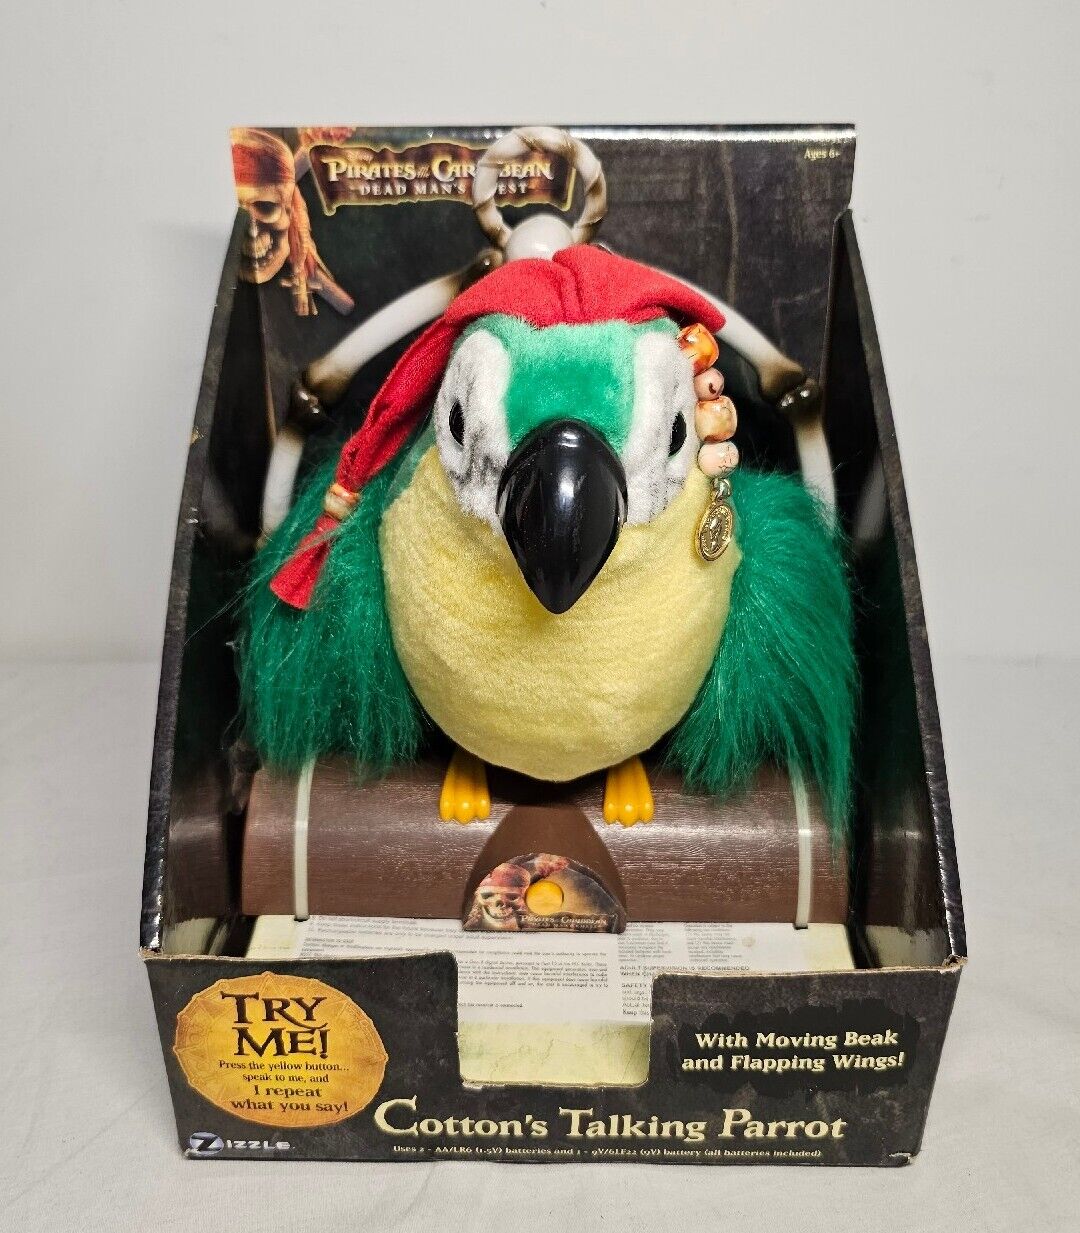 Pirates Of The Caribbean Talking Parrot , Mimics and Repeats New in Box